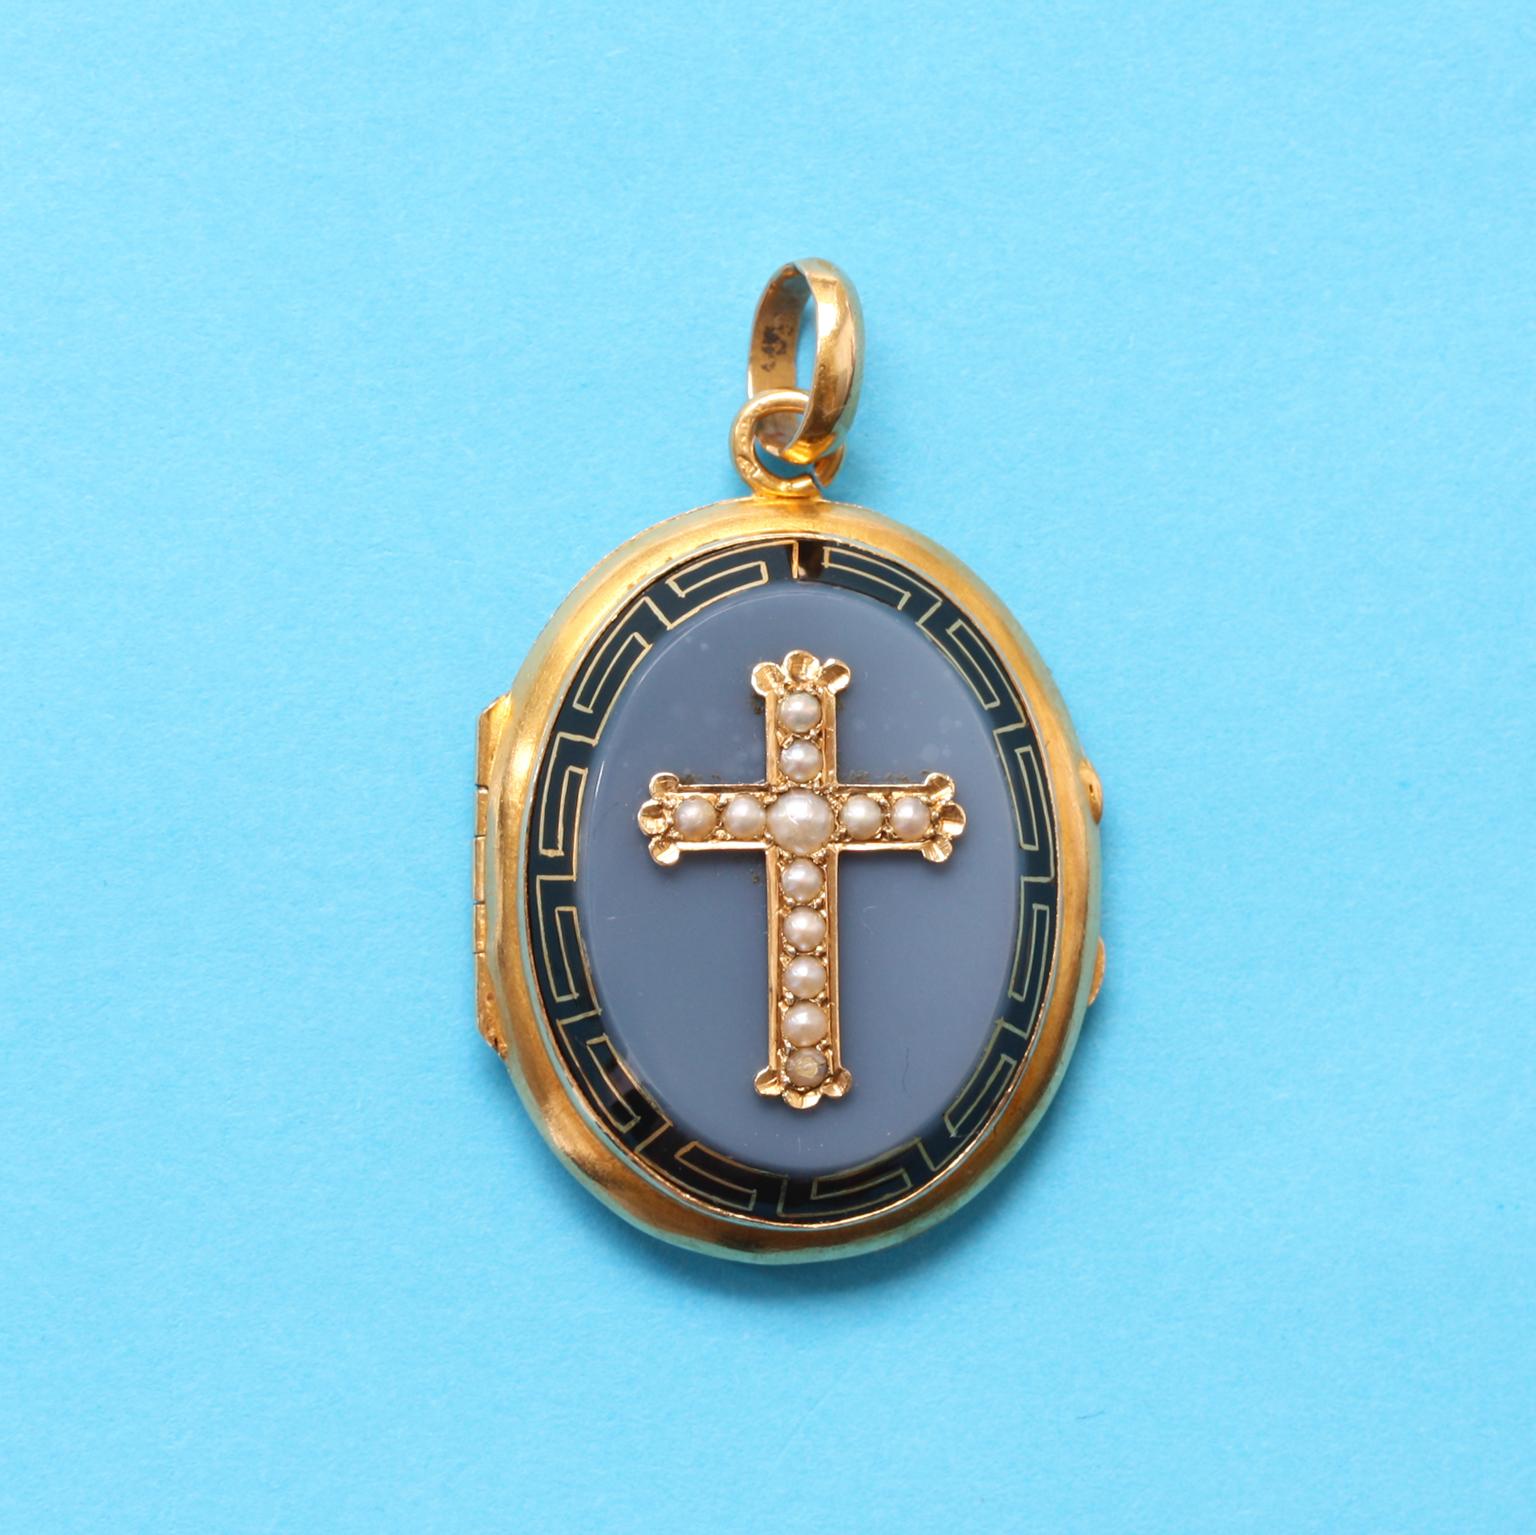 An 18 carat yellow gold oval locket with a pearl cross incrusted in an onyx plaque with a border of a black enamel meander border, with one glassed and hinged compartment, France circa 1890.

weight: 13.56 grams
dimensions: 4.5 x 2.7 cm
